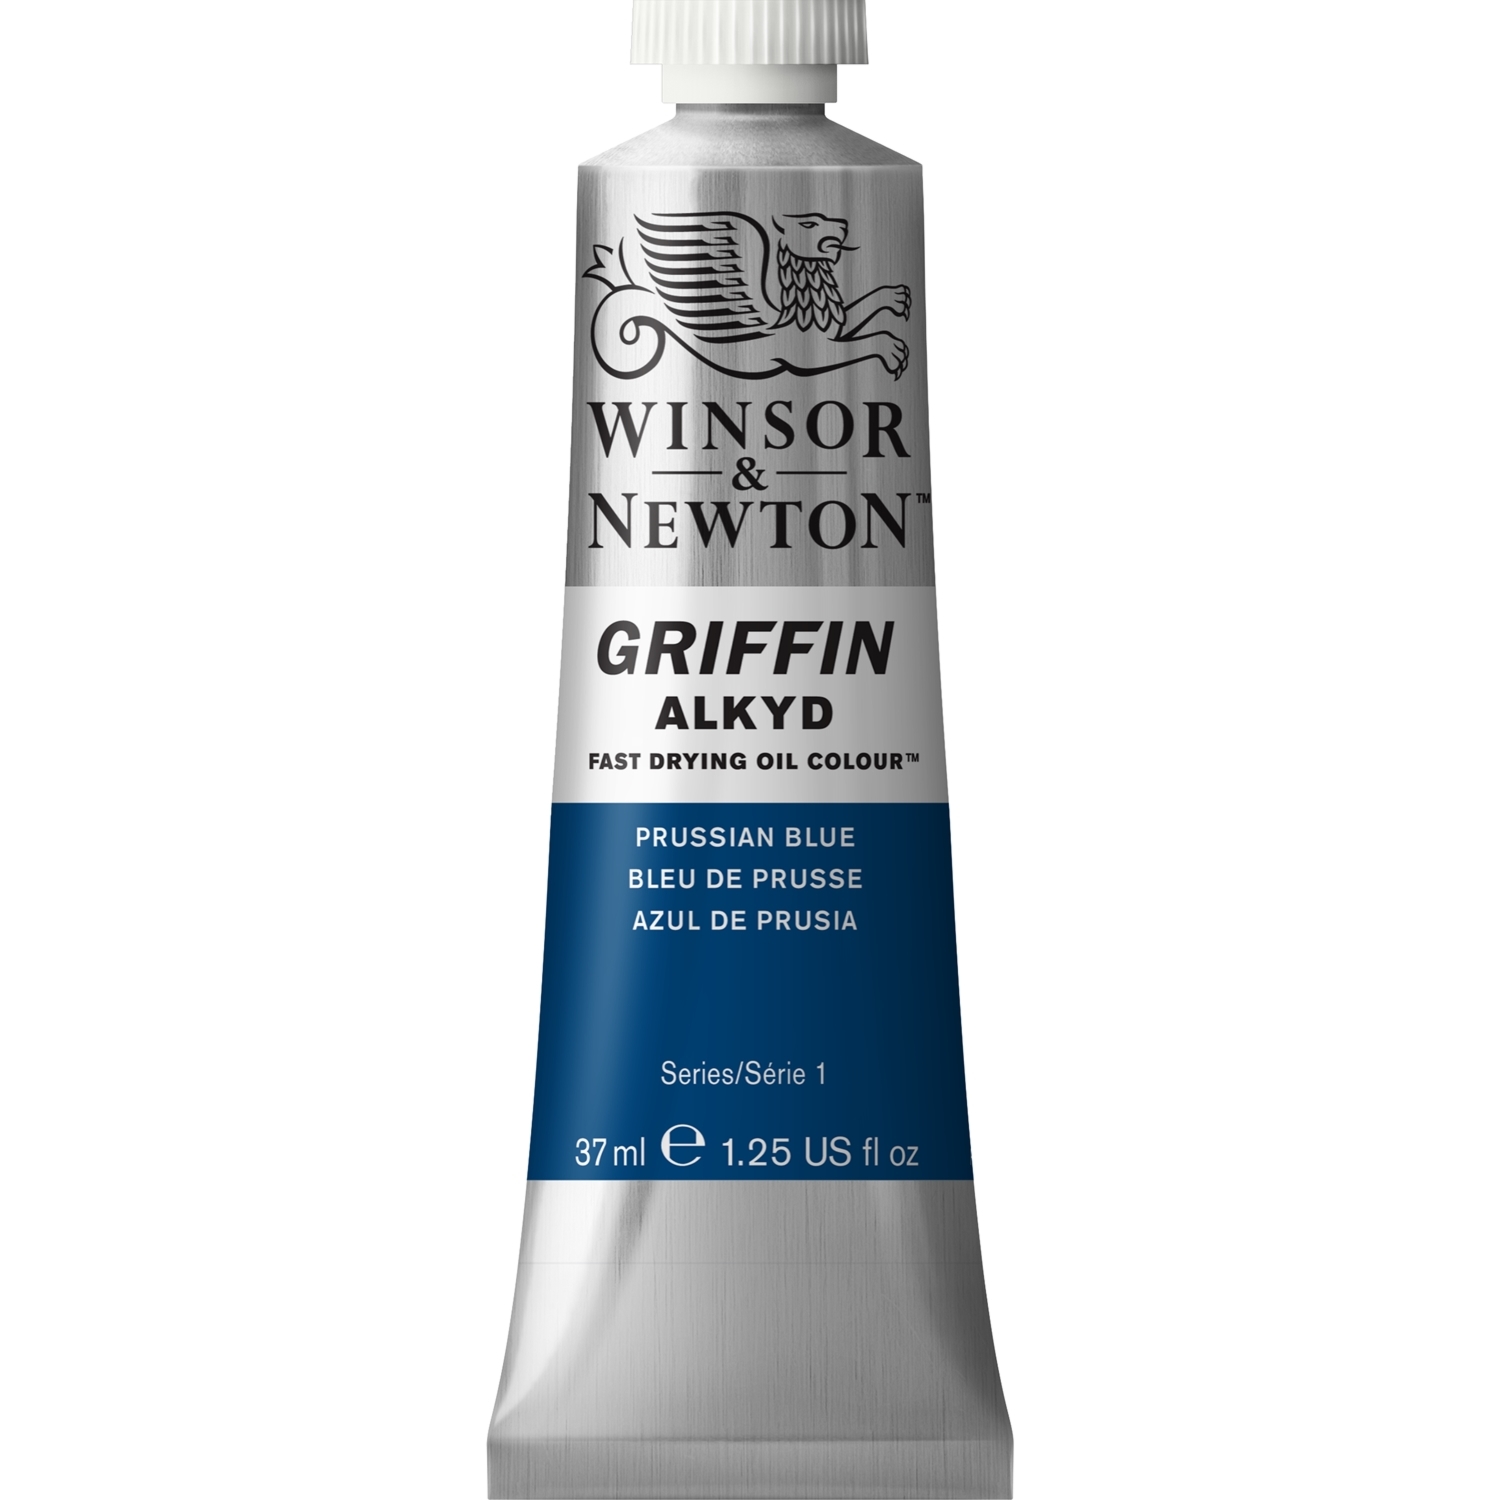 Winsor and Newton Griffin Alkyd Oil Colour - Prussian Blue Image 1